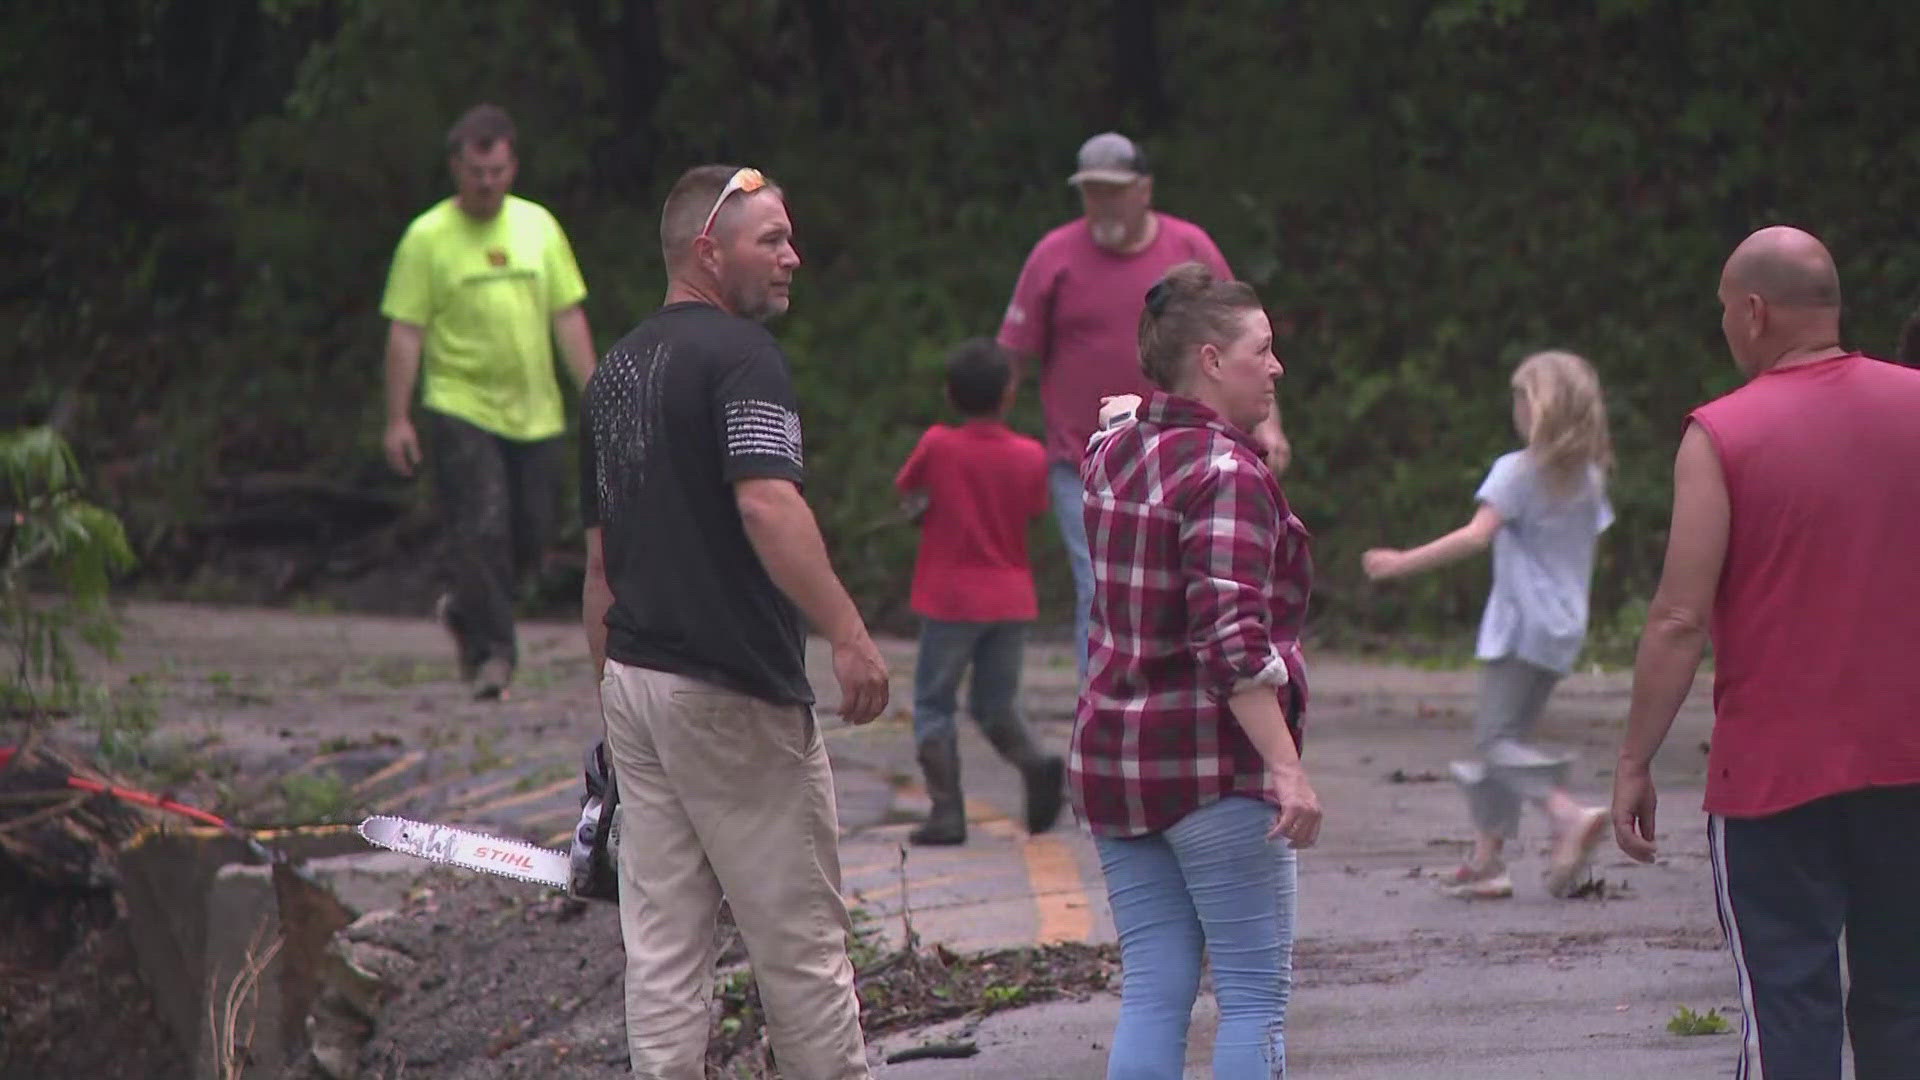 Not only did hail cause problems Wednesday in Jefferson County, but heavy rain moved through the area, leading to flash floods.